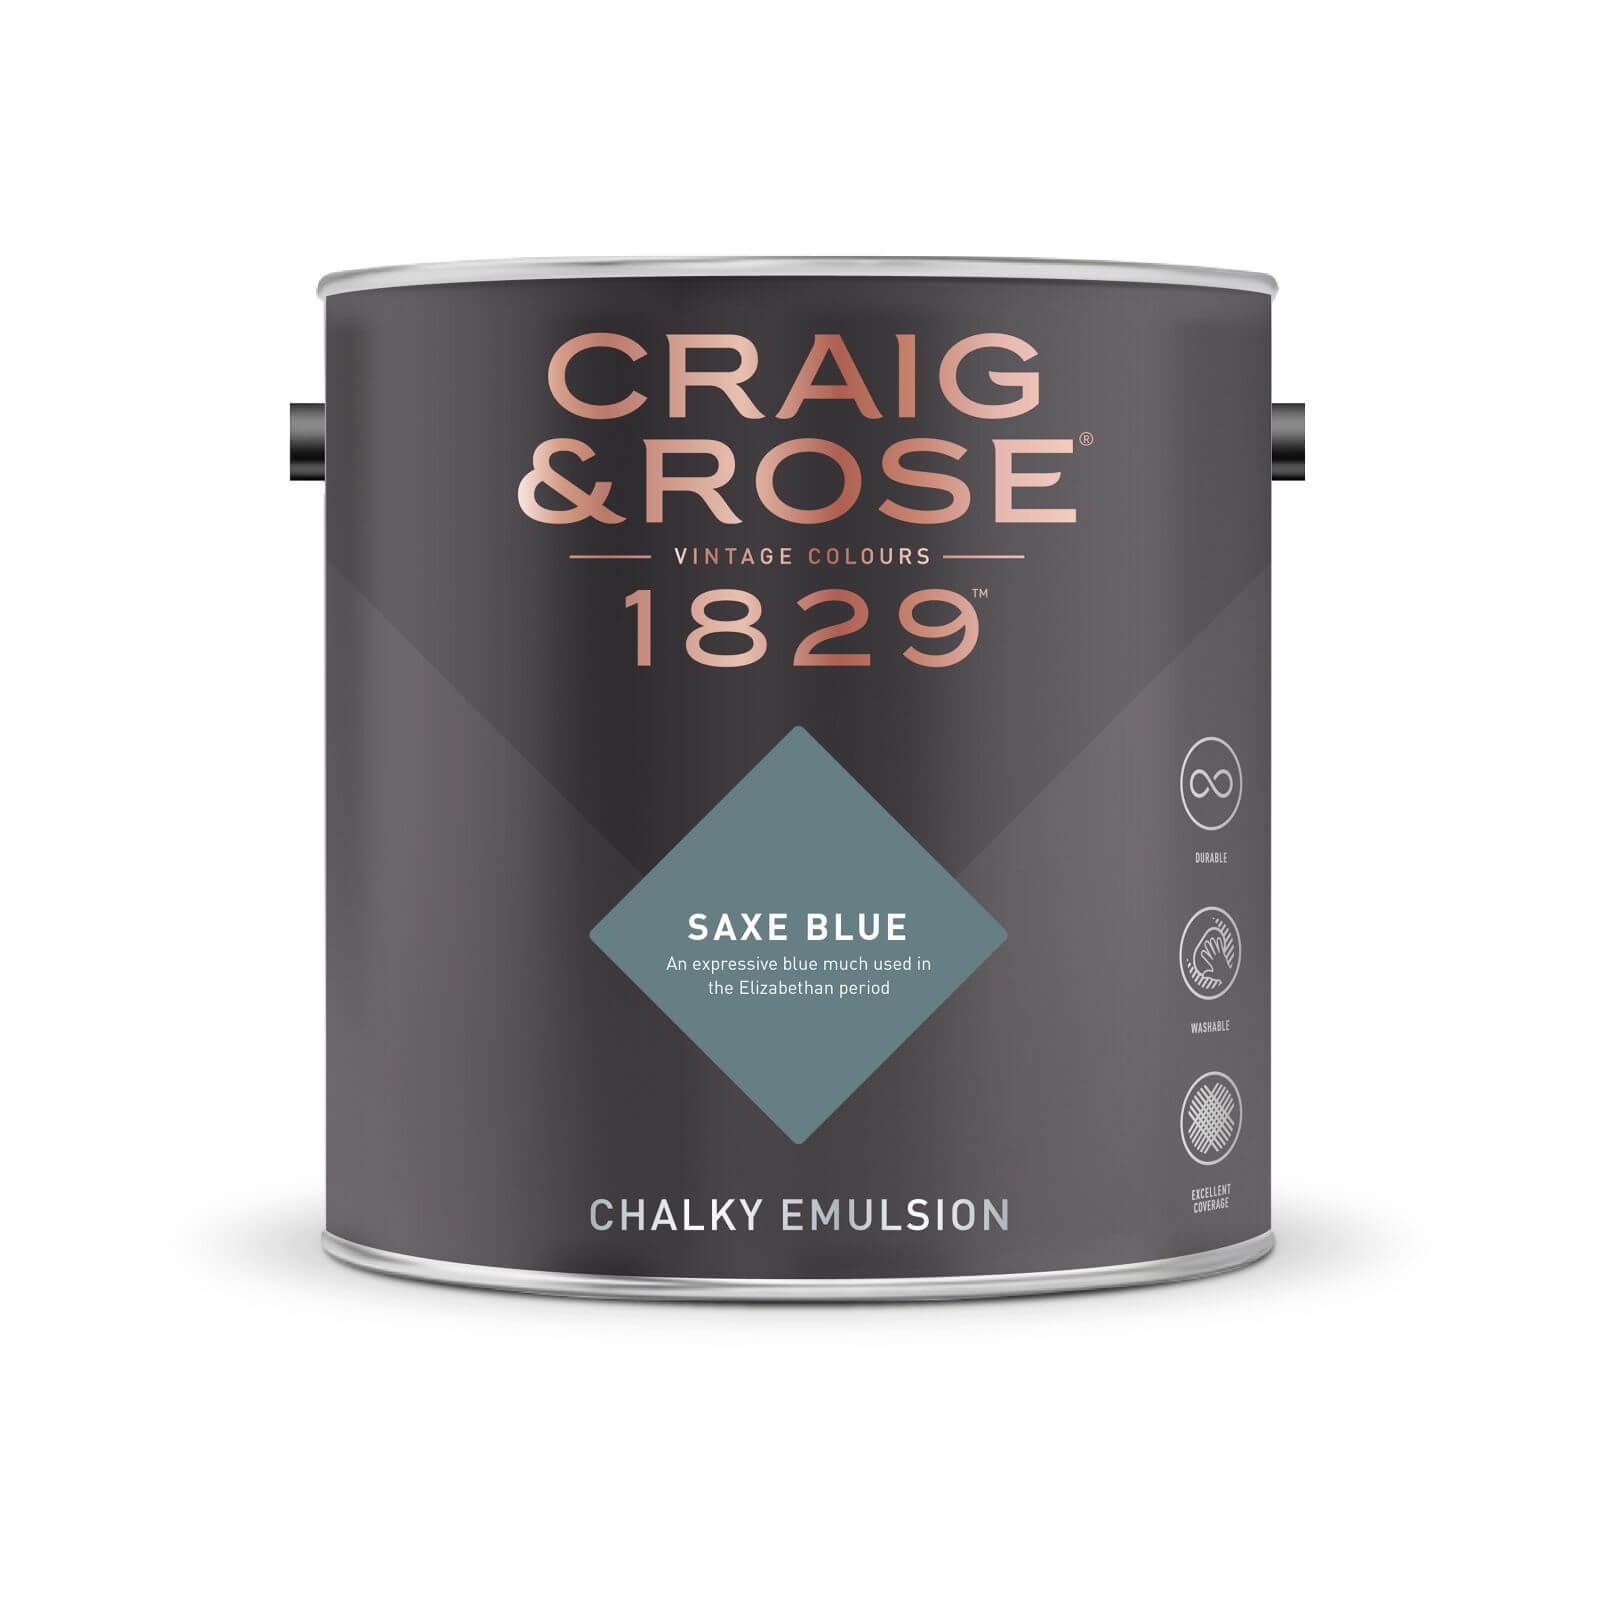 Craig & Rose 1829 Chalky Emulsion Paint Saxe Blue - Tester 50ml